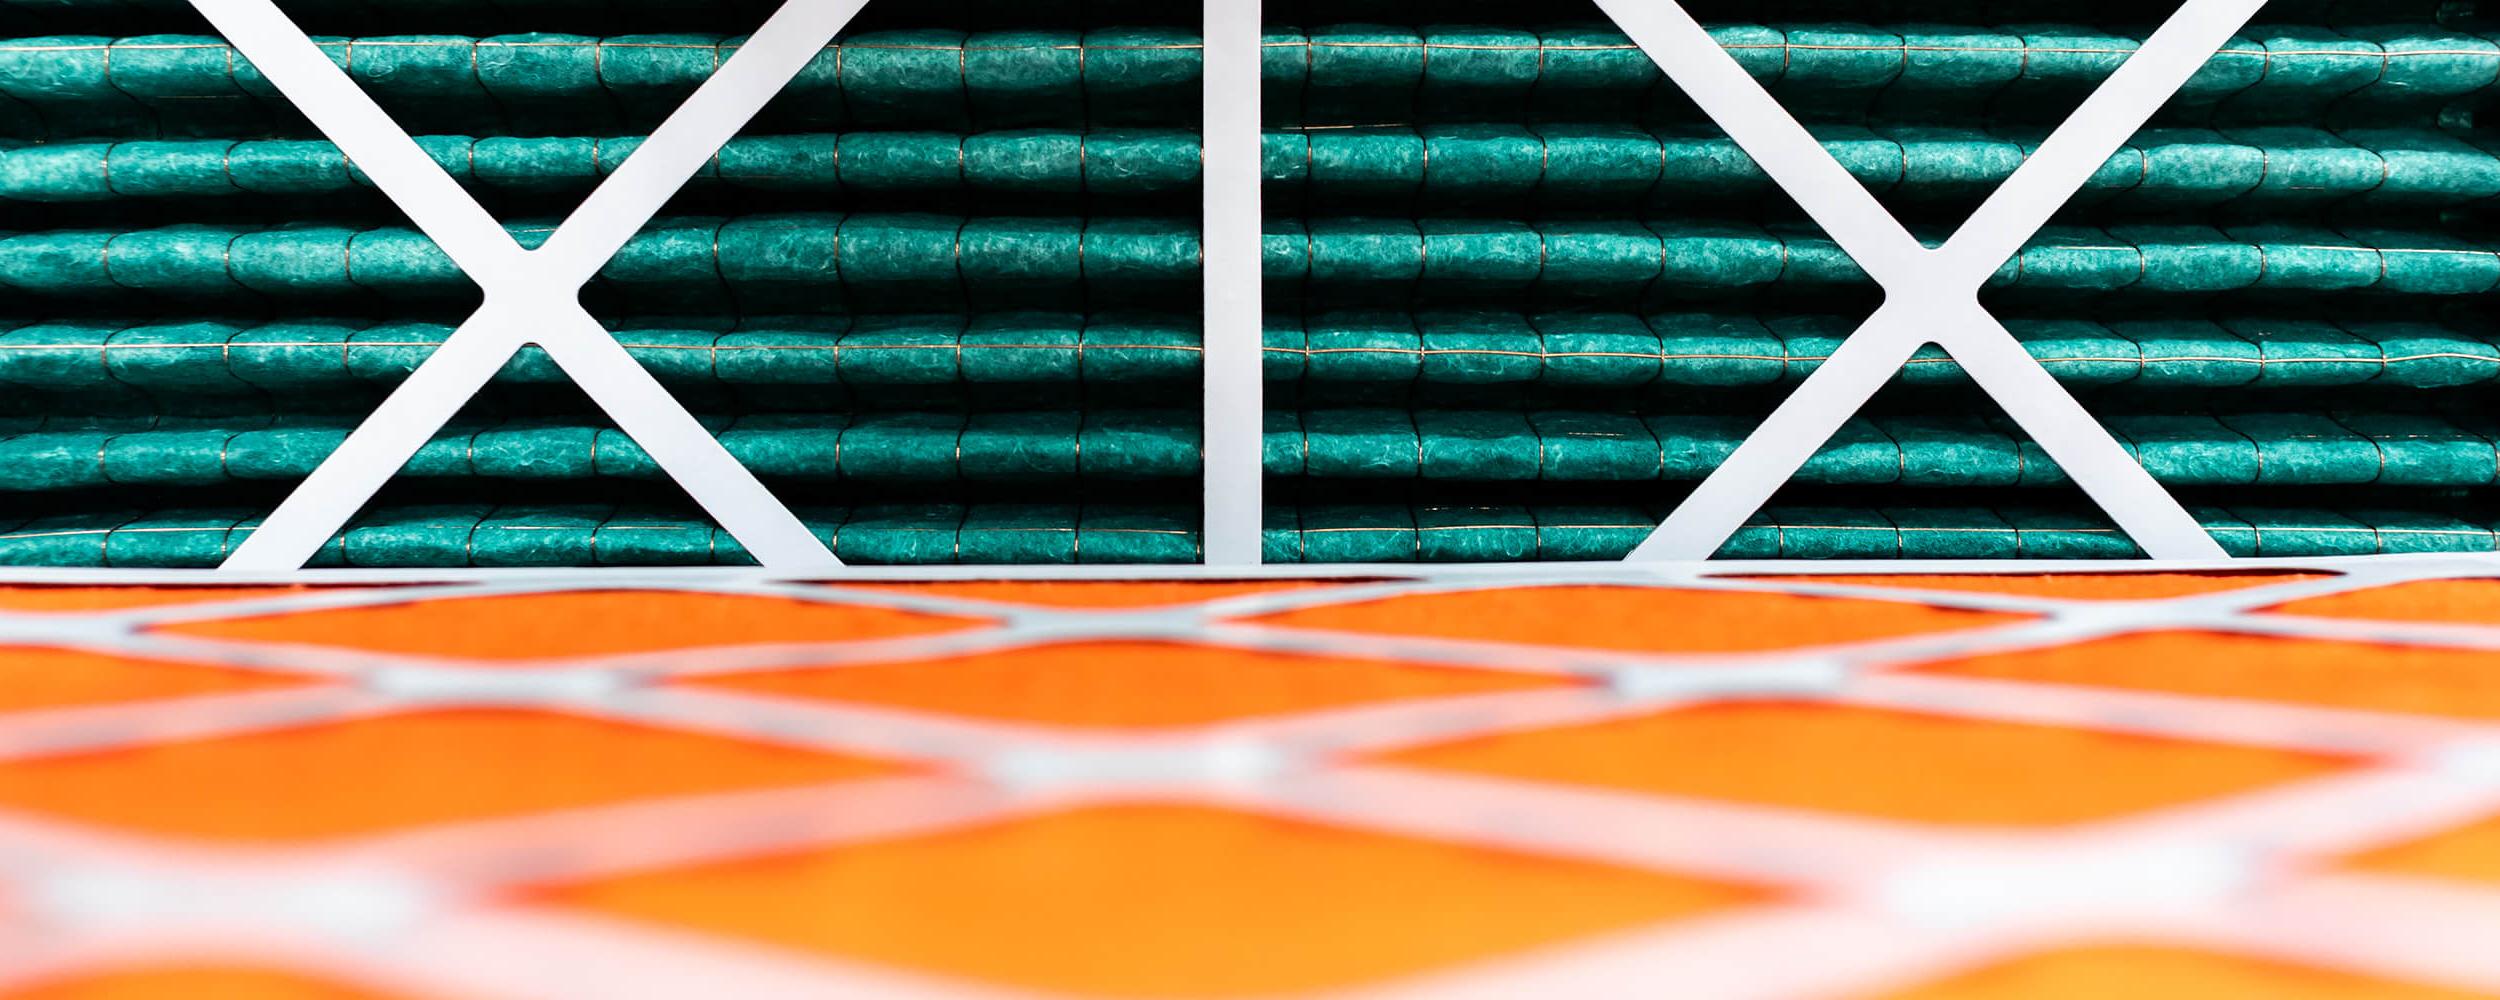 Close-up photography of rolls of orange and green insulating material being held in place with white cross frames